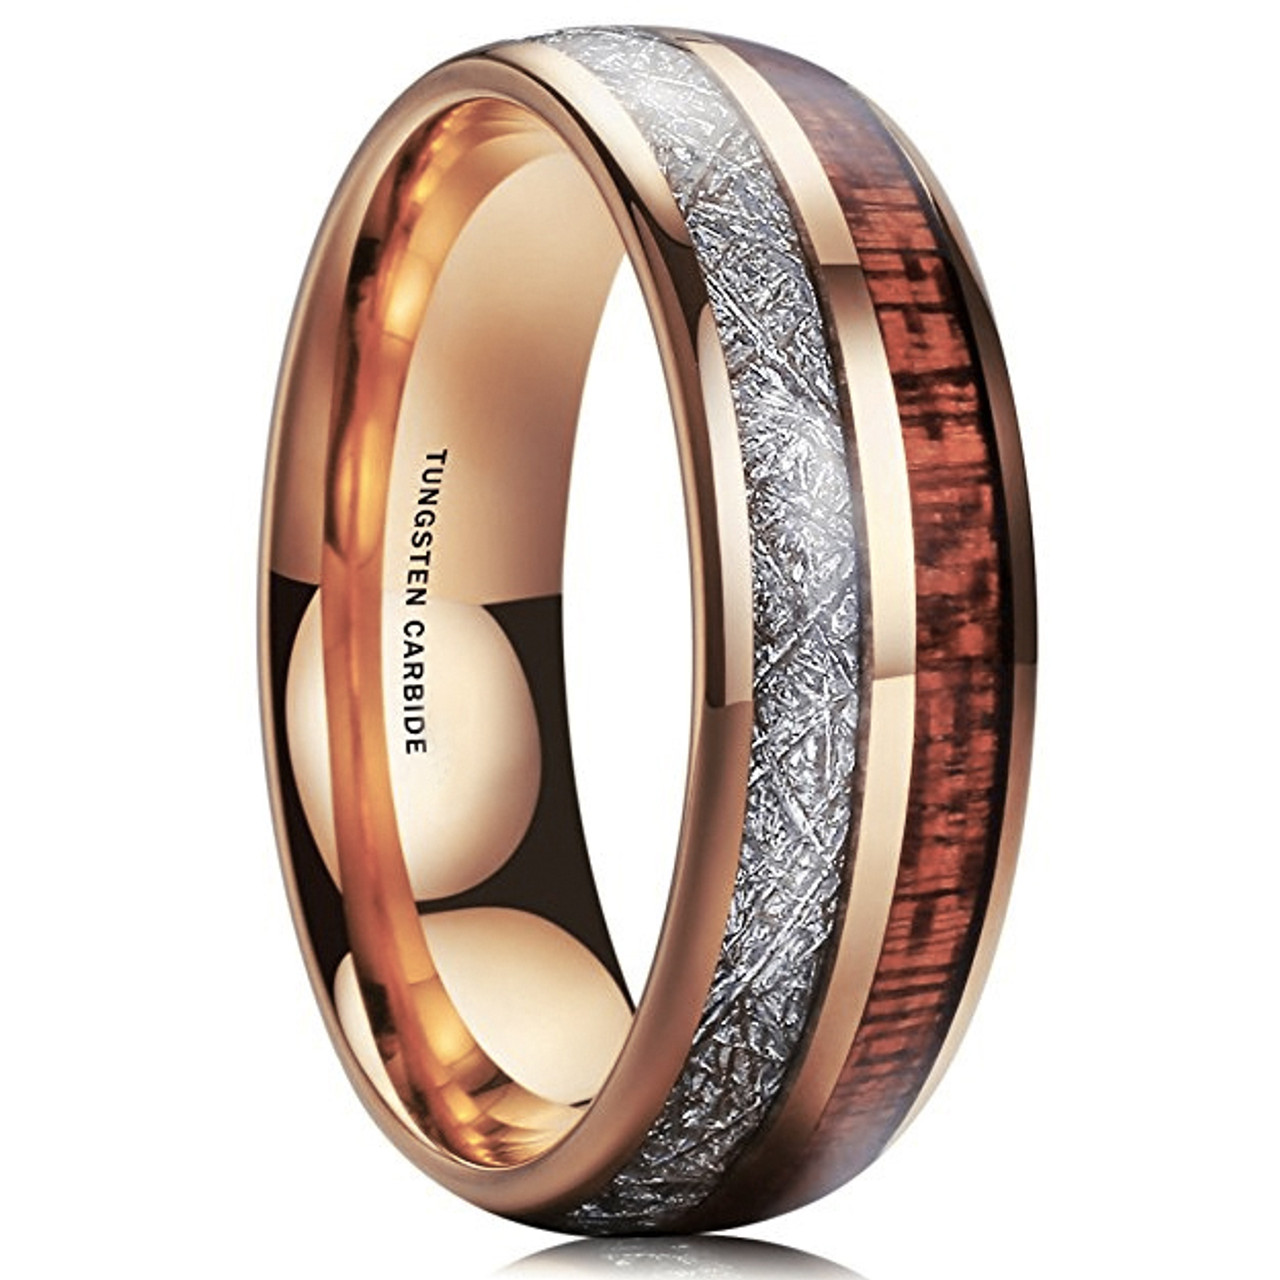 Men's Wedding Tungsten Wedding Band (8mm). Rose Gold Tungsten Band with Wood Inlay and Inspired Meteorite. Domed Tungsten Carbide Ring. Comfort Fit 